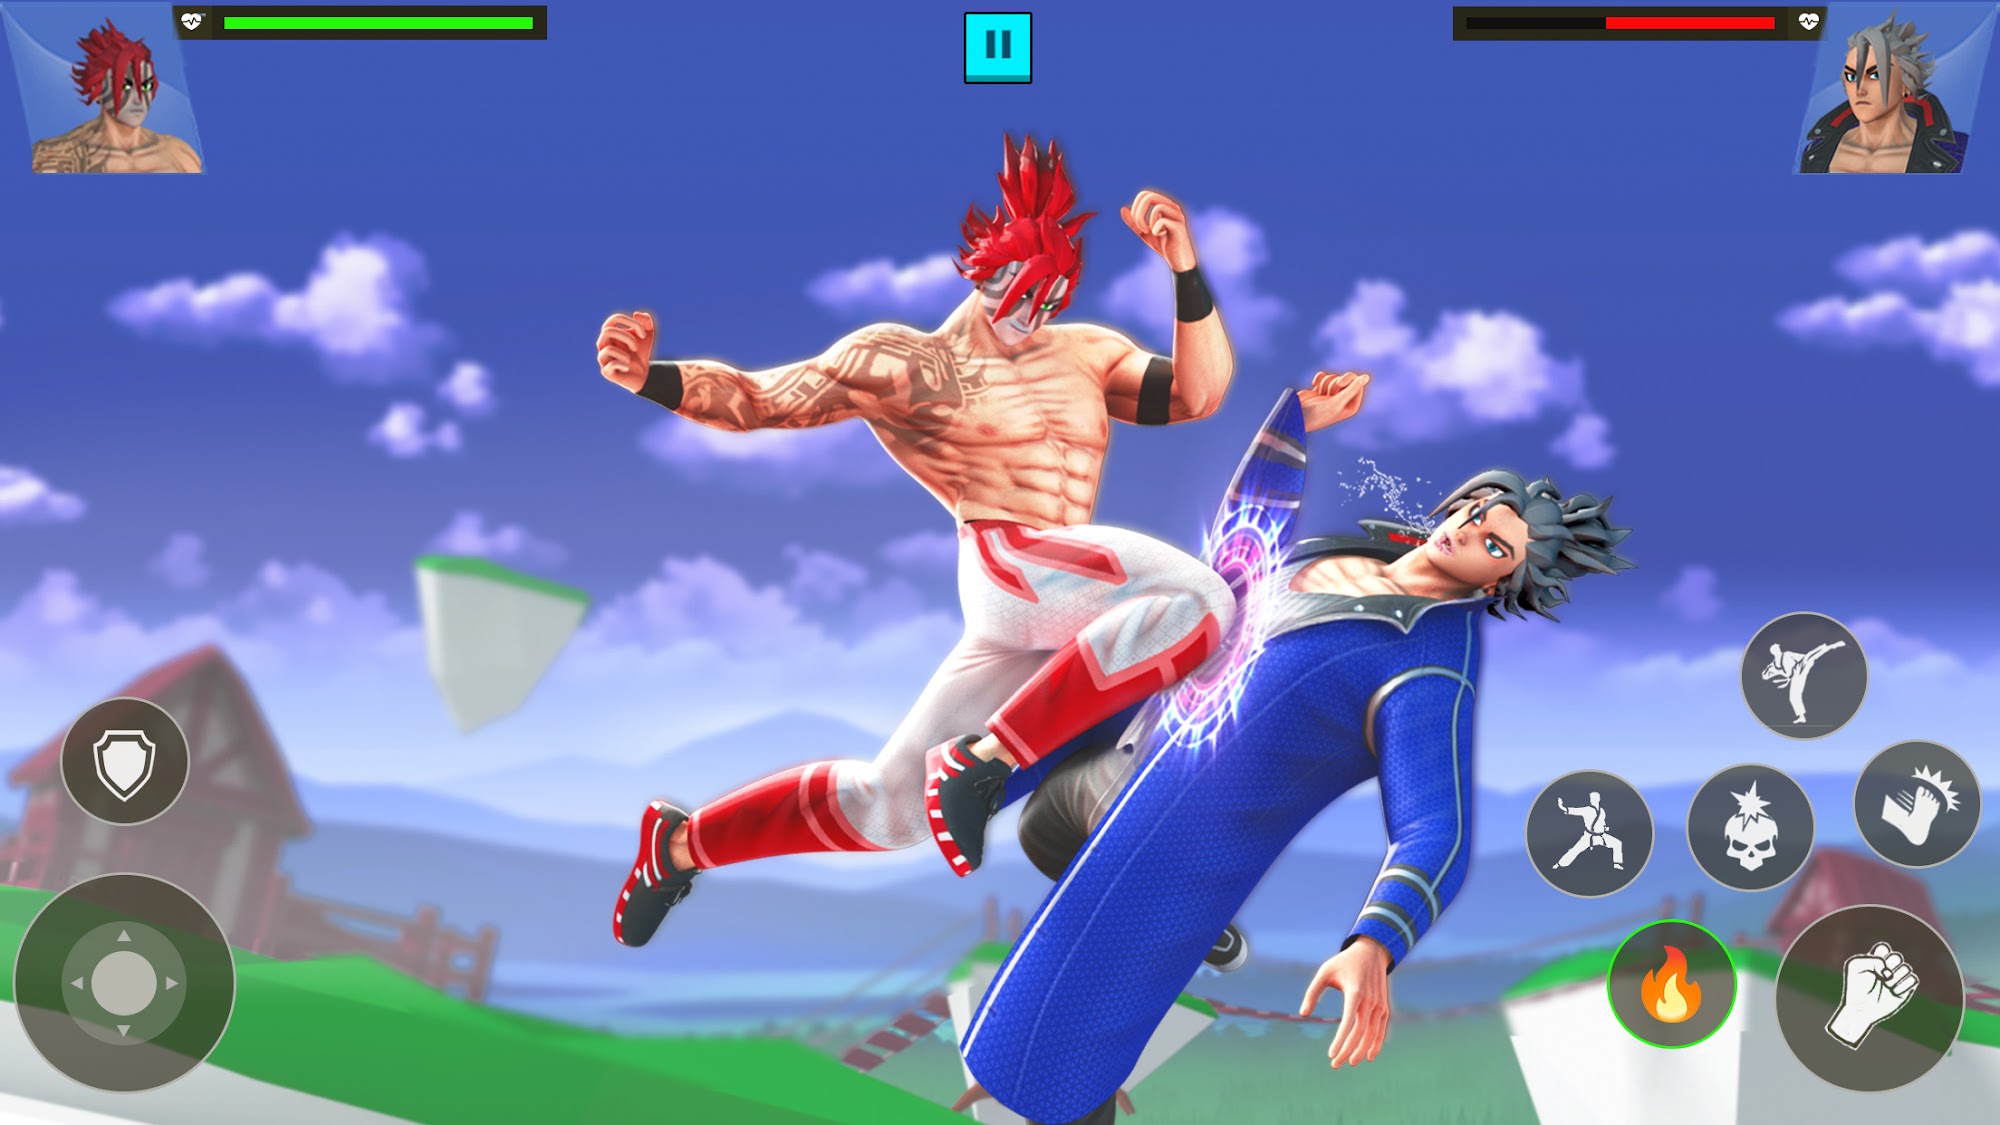 Download Anime Fighting Game Android free game.